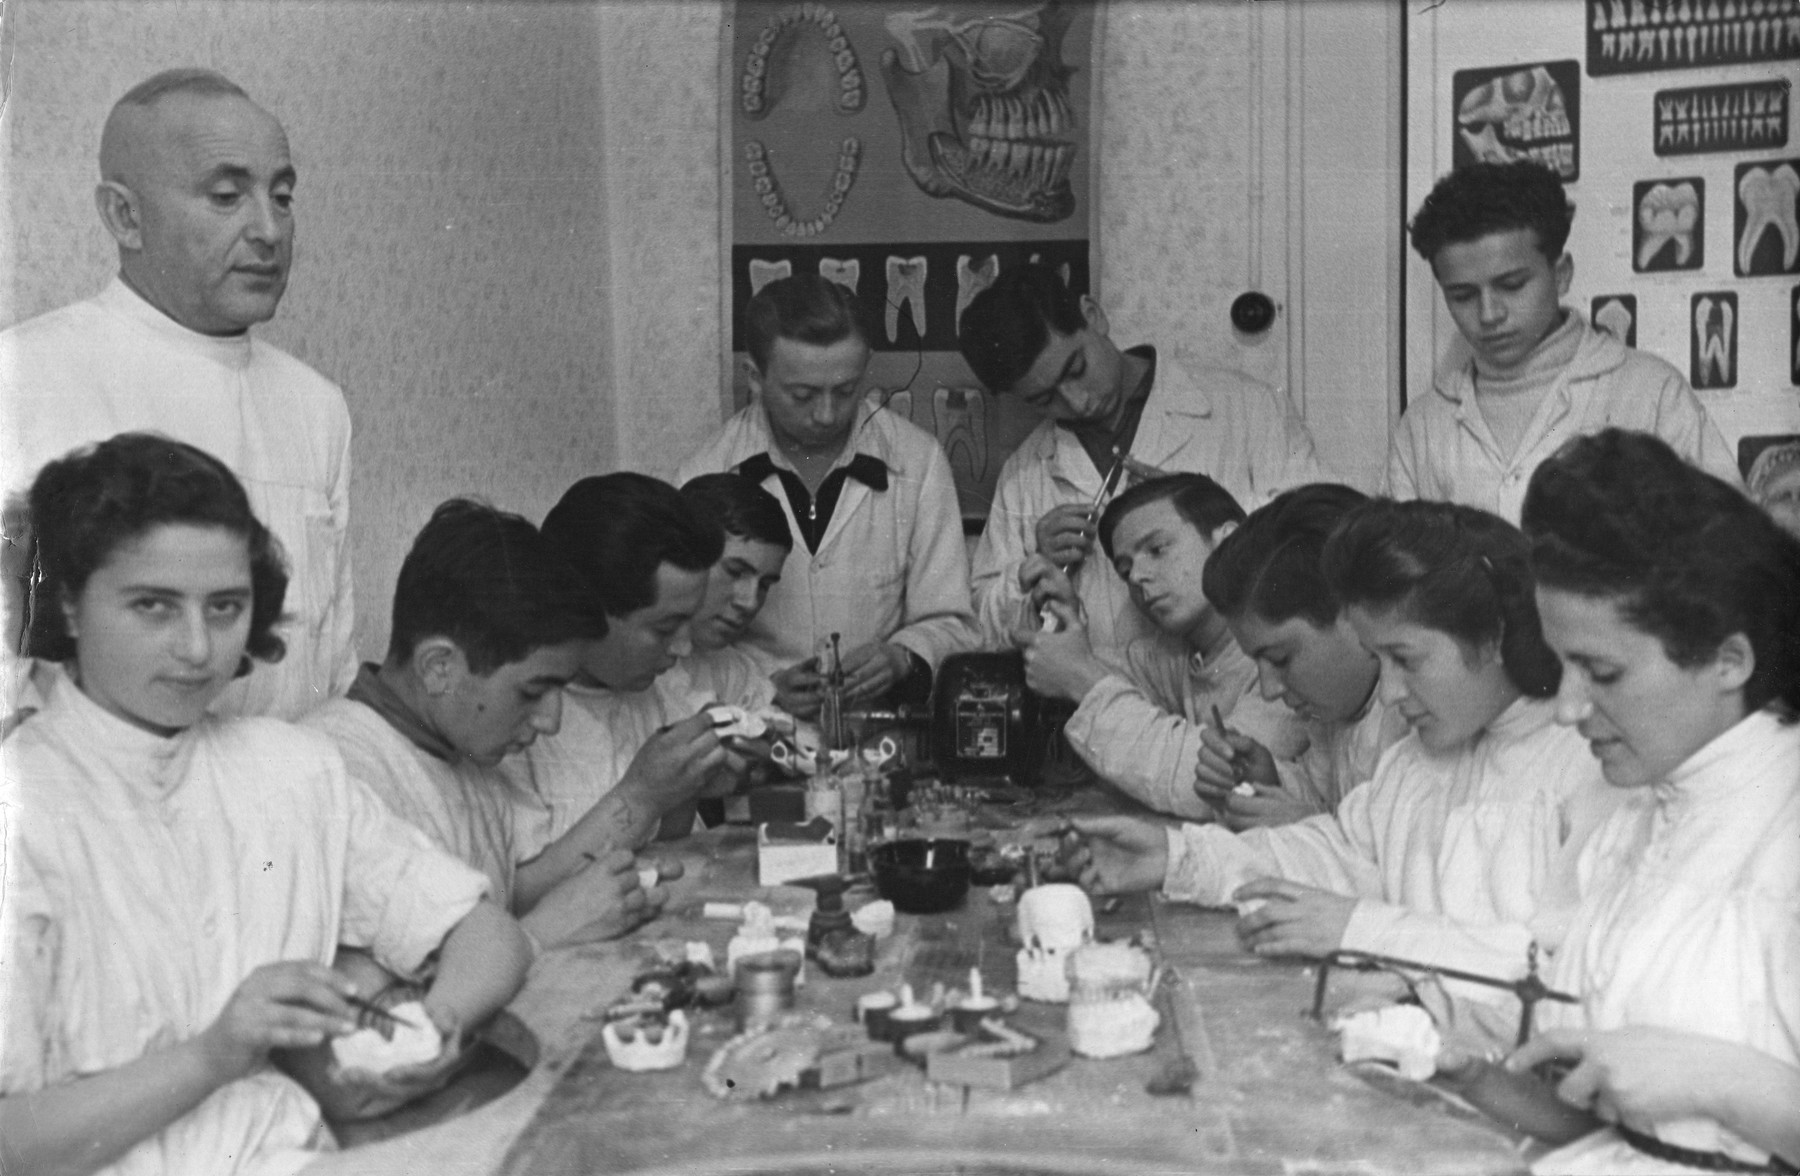 Young men and women learn dentistry in an ORT (Organization for Rehabilitation through Training) vocational program in the Landsberg displaced persons' camp. [Oversized print]